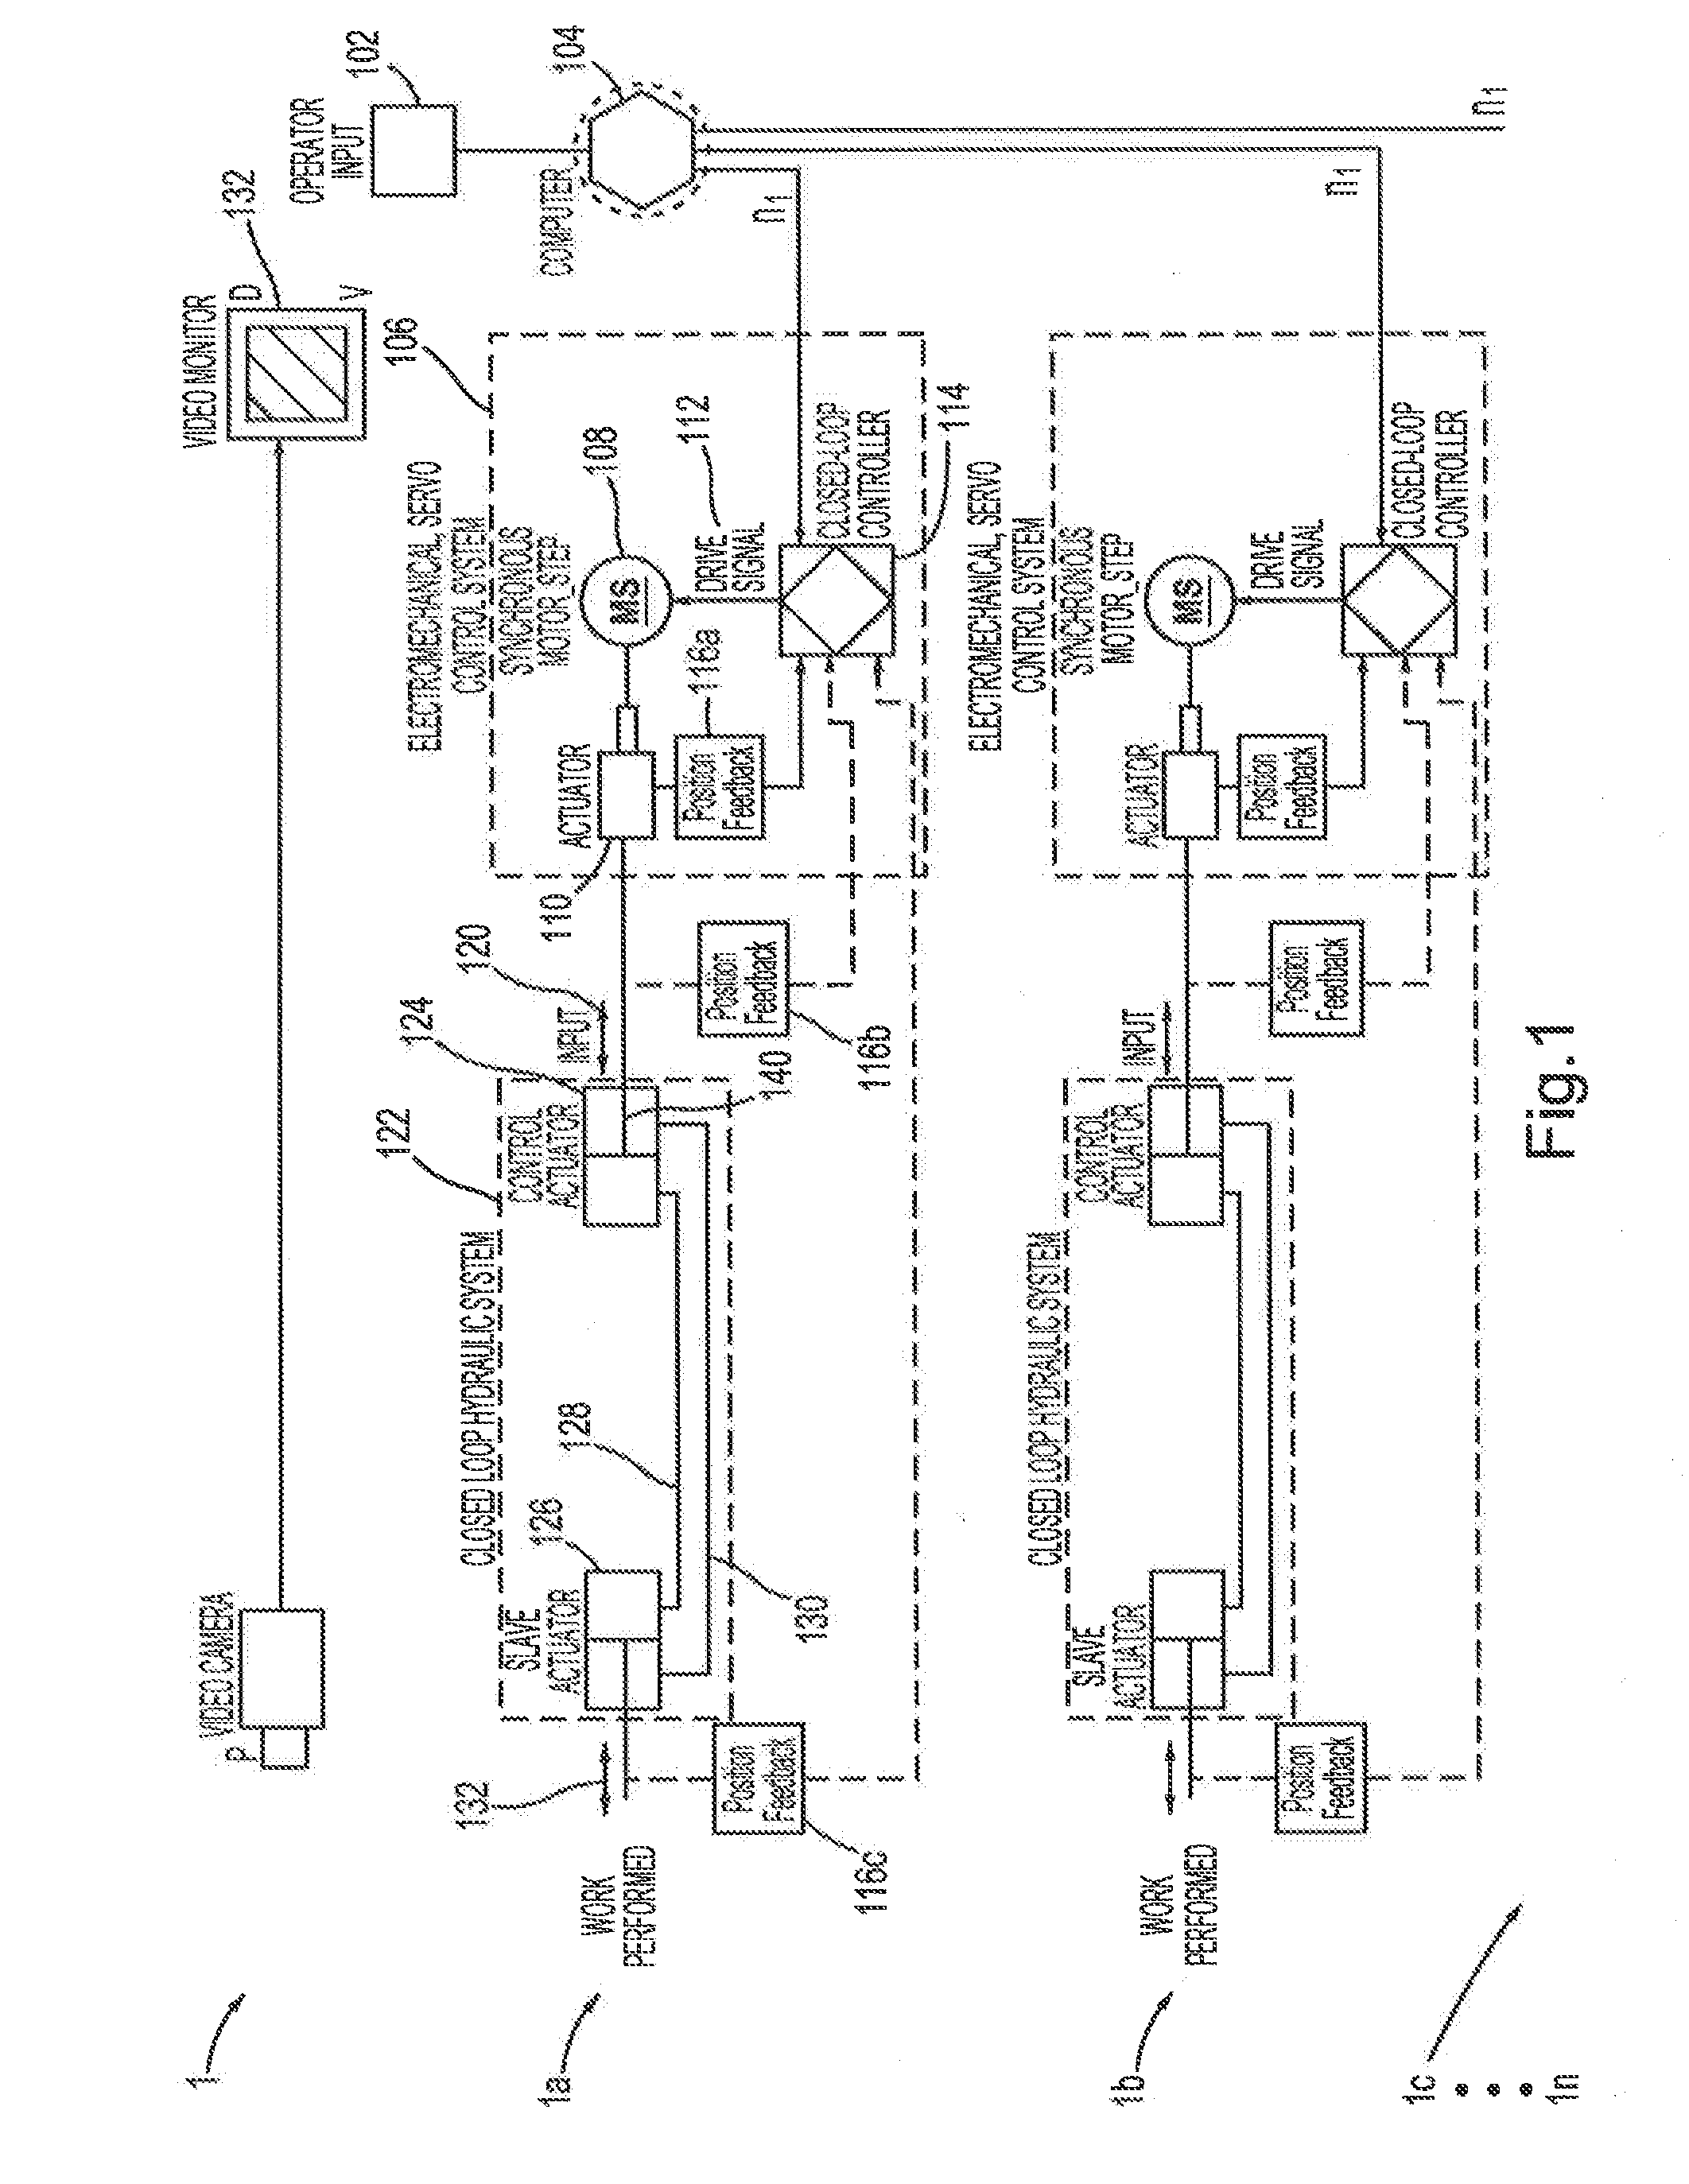 Powered signal controlled hand actuated articulating device